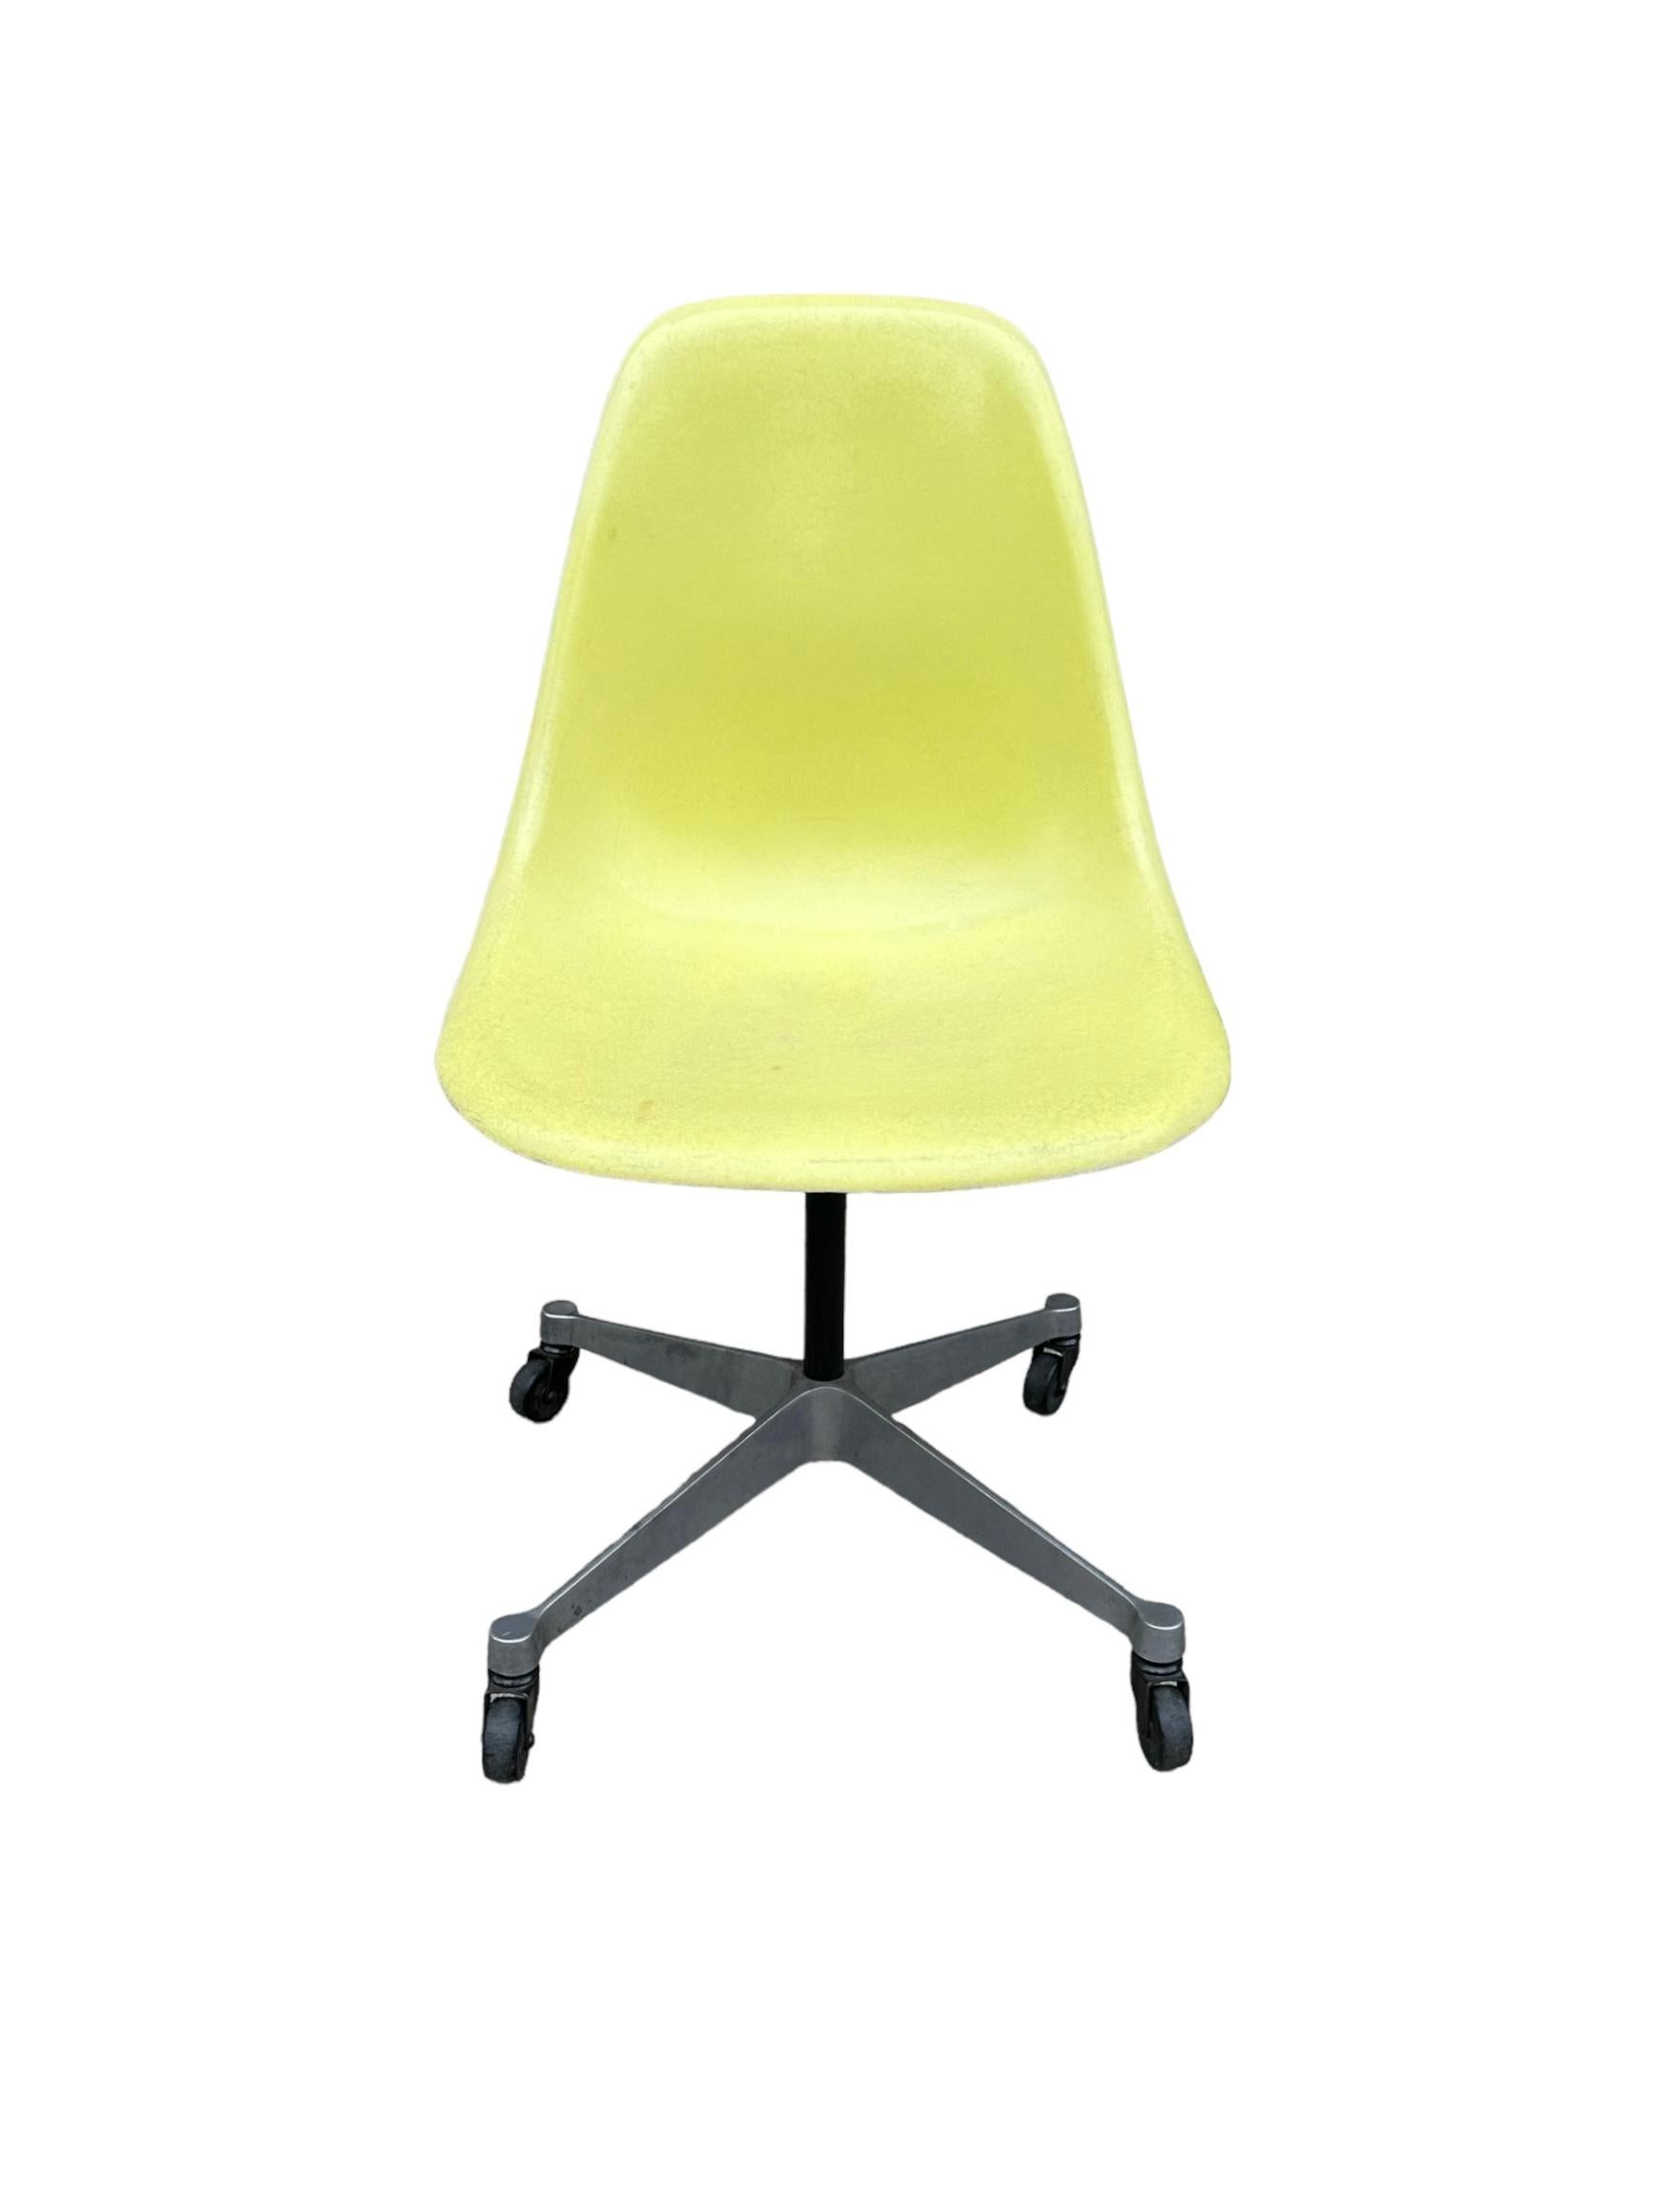 Herman Miller Eames PSCC Swivel Desk Chair In Good Condition For Sale In Brooklyn, NY